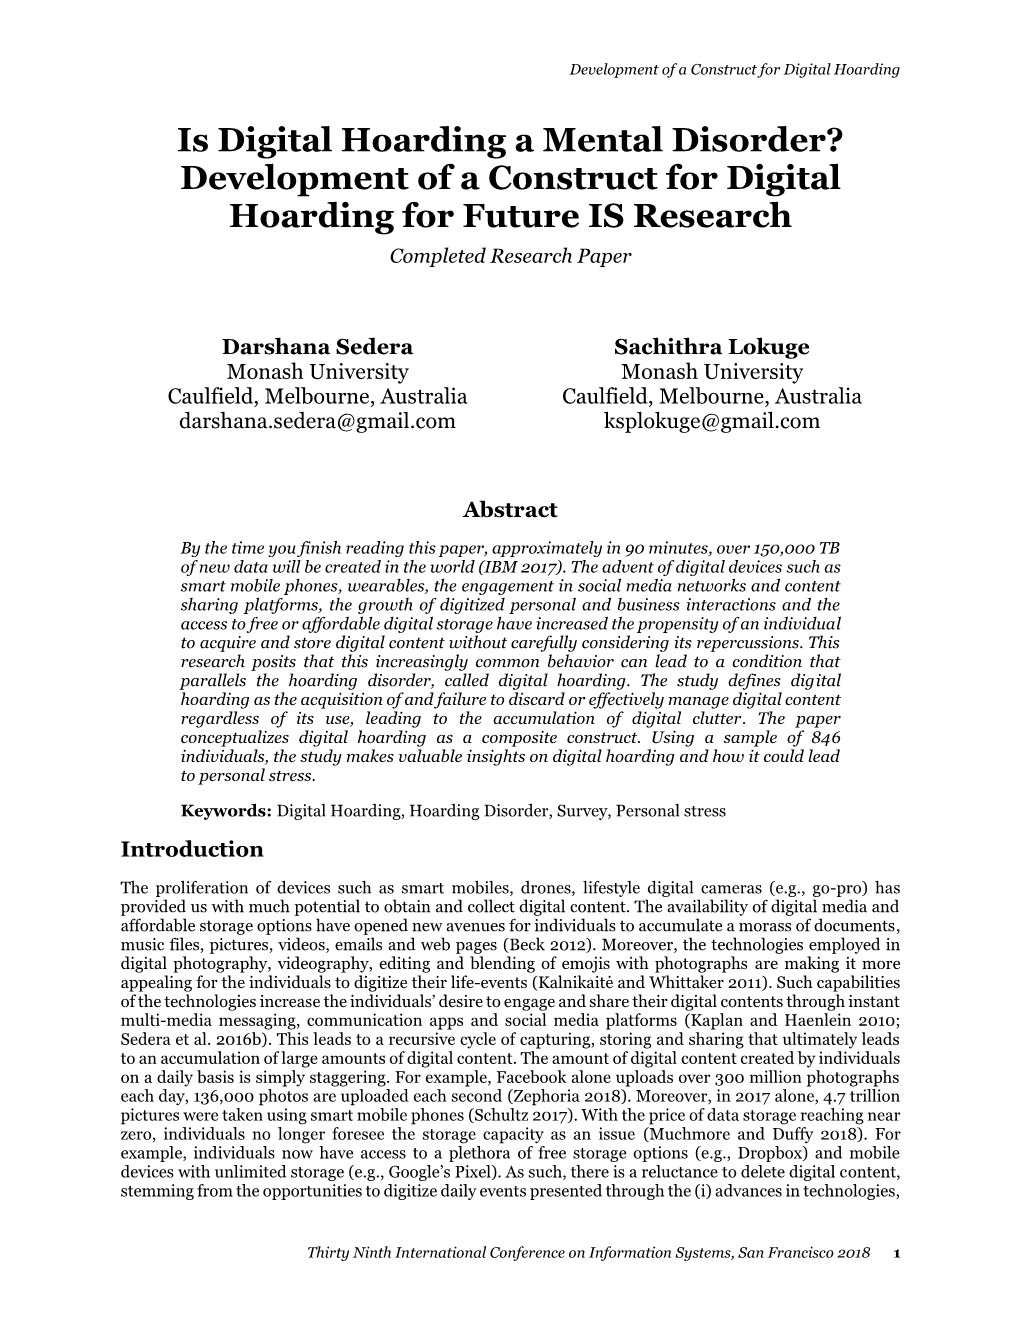 Is Digital Hoarding a Mental Disorder? Development of a Construct for Digital Hoarding for Future IS Research Completed Research Paper